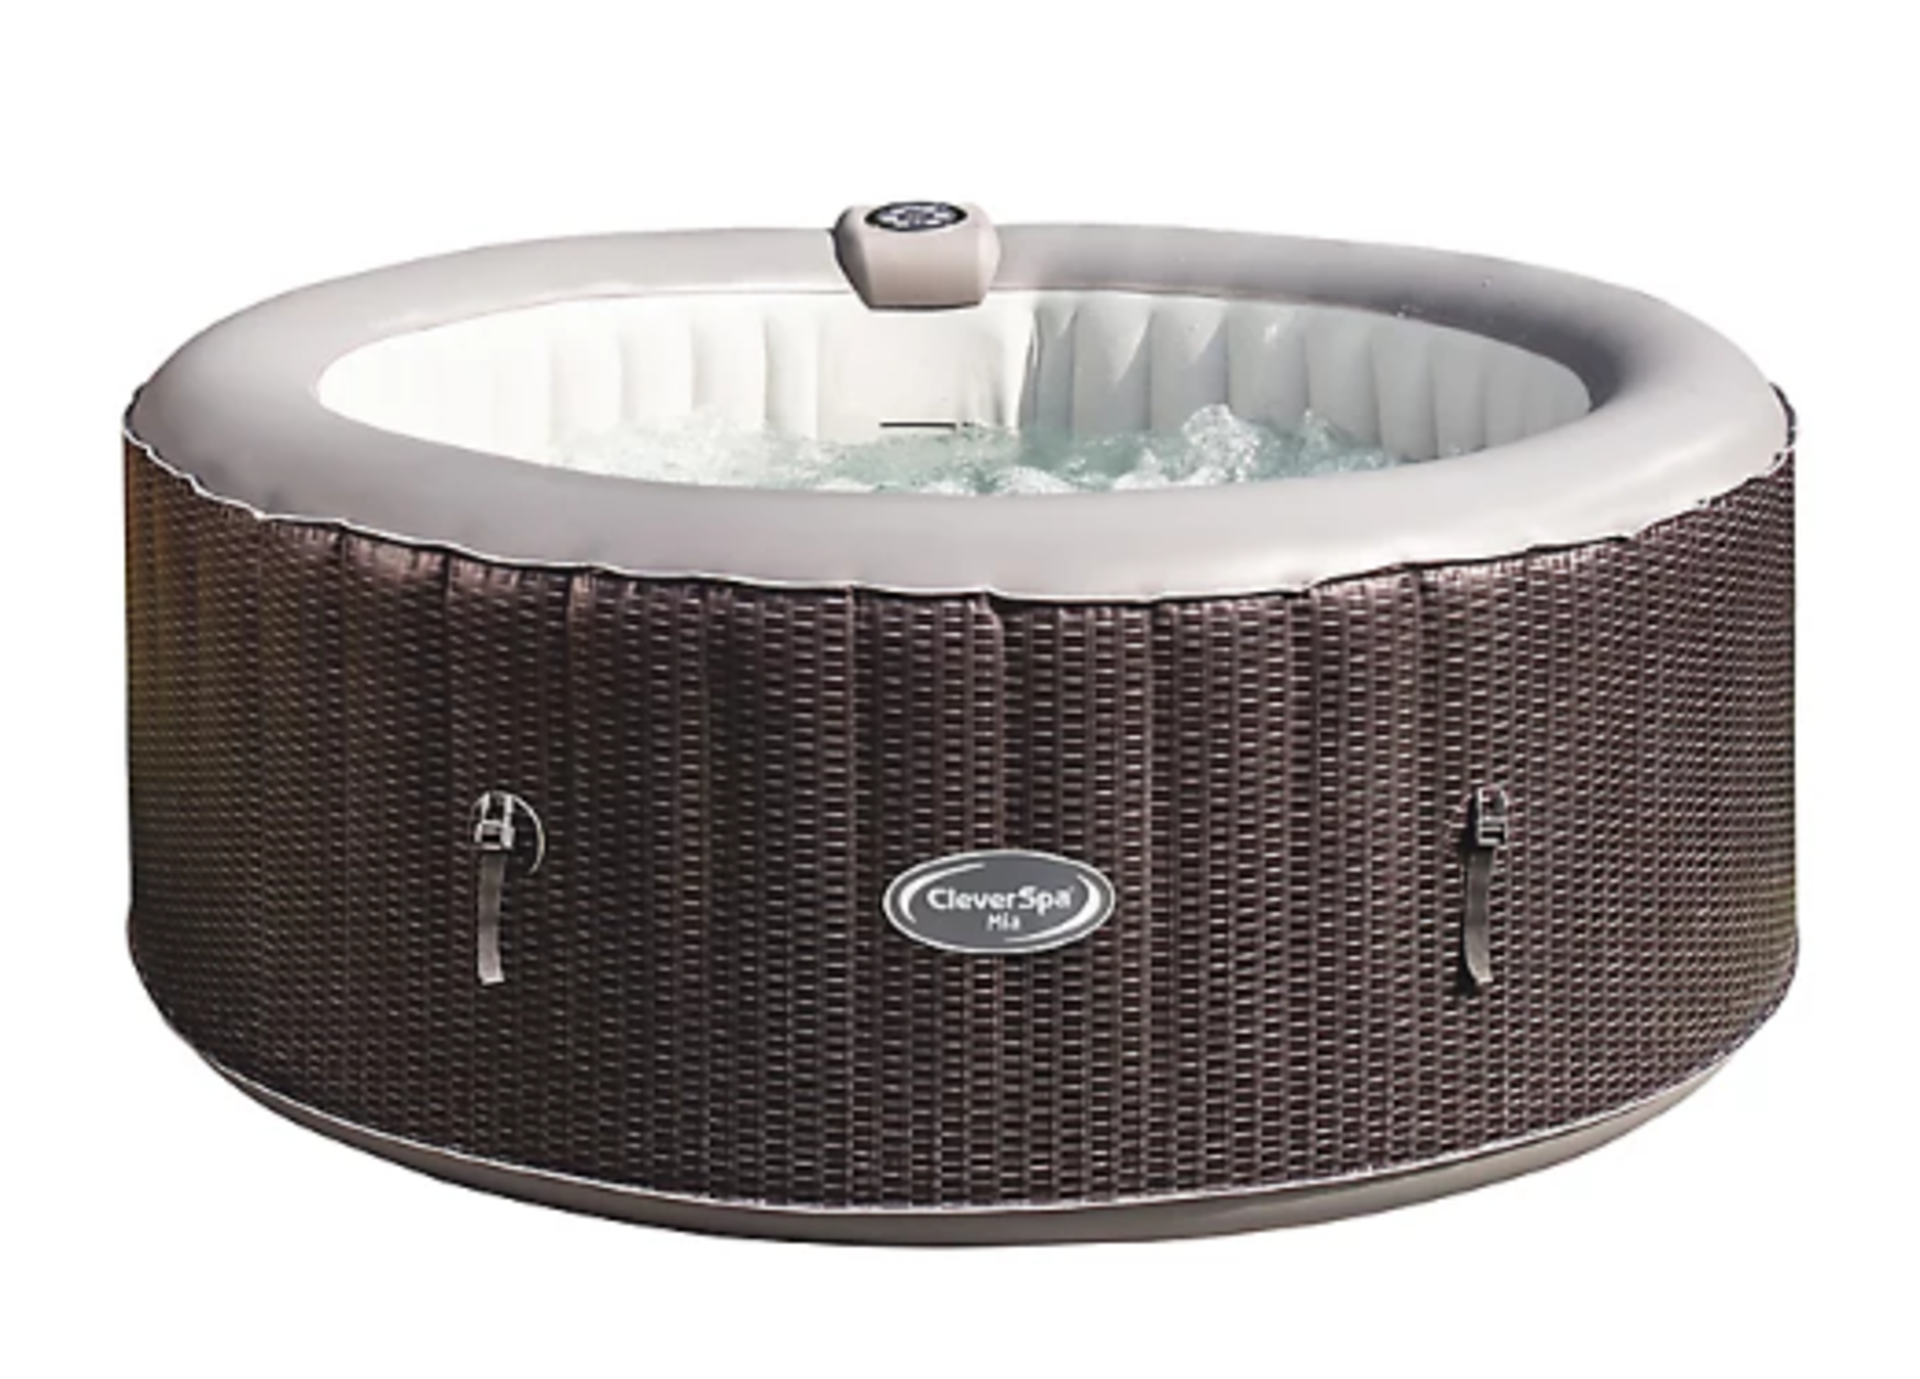 CleverSpa Mia 4 Person Hot tub. - ER. RRP £299.00. A great way to get into the spa lifestyle if